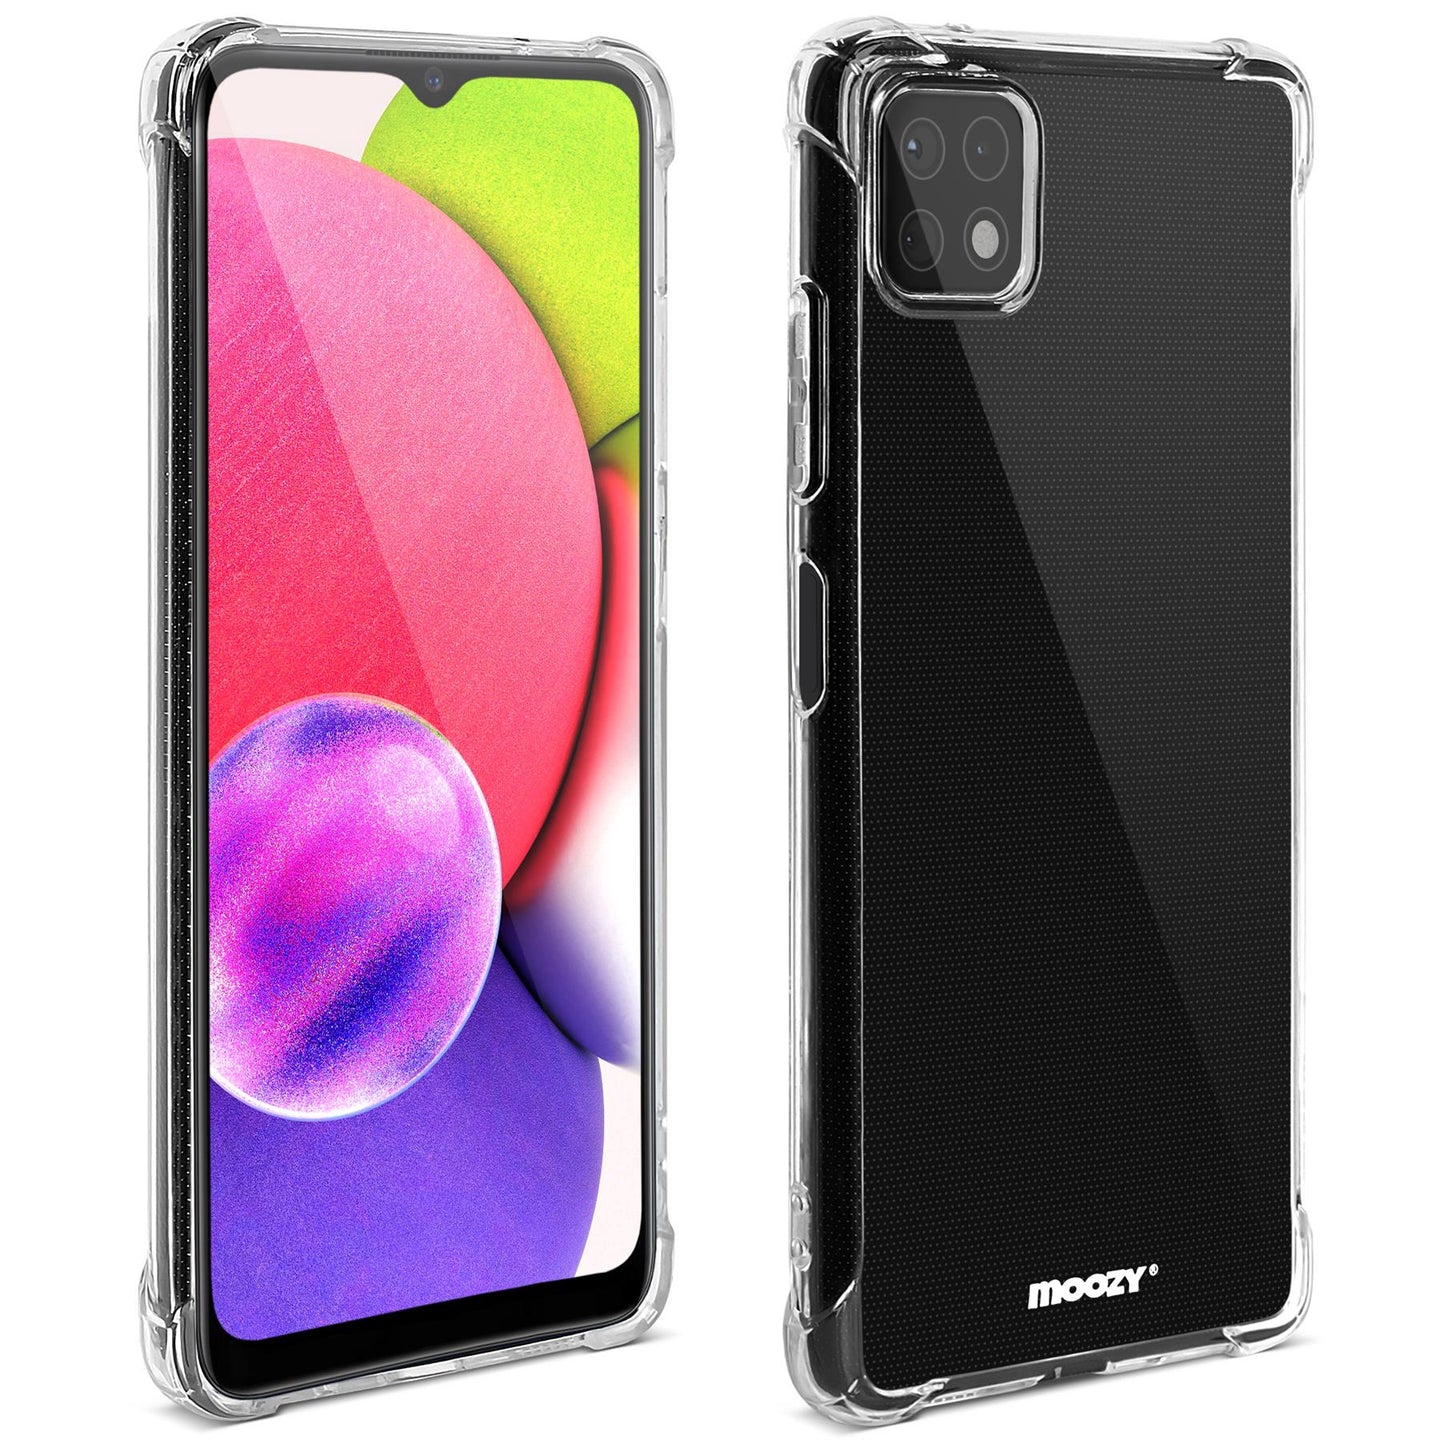 Moozy Shockproof Silicone Case for Samsung A22 5G - Transparent Case with Shock Absorbing 3D Corners Crystal Clear Protective Phone Case Soft TPU Silicone Cover